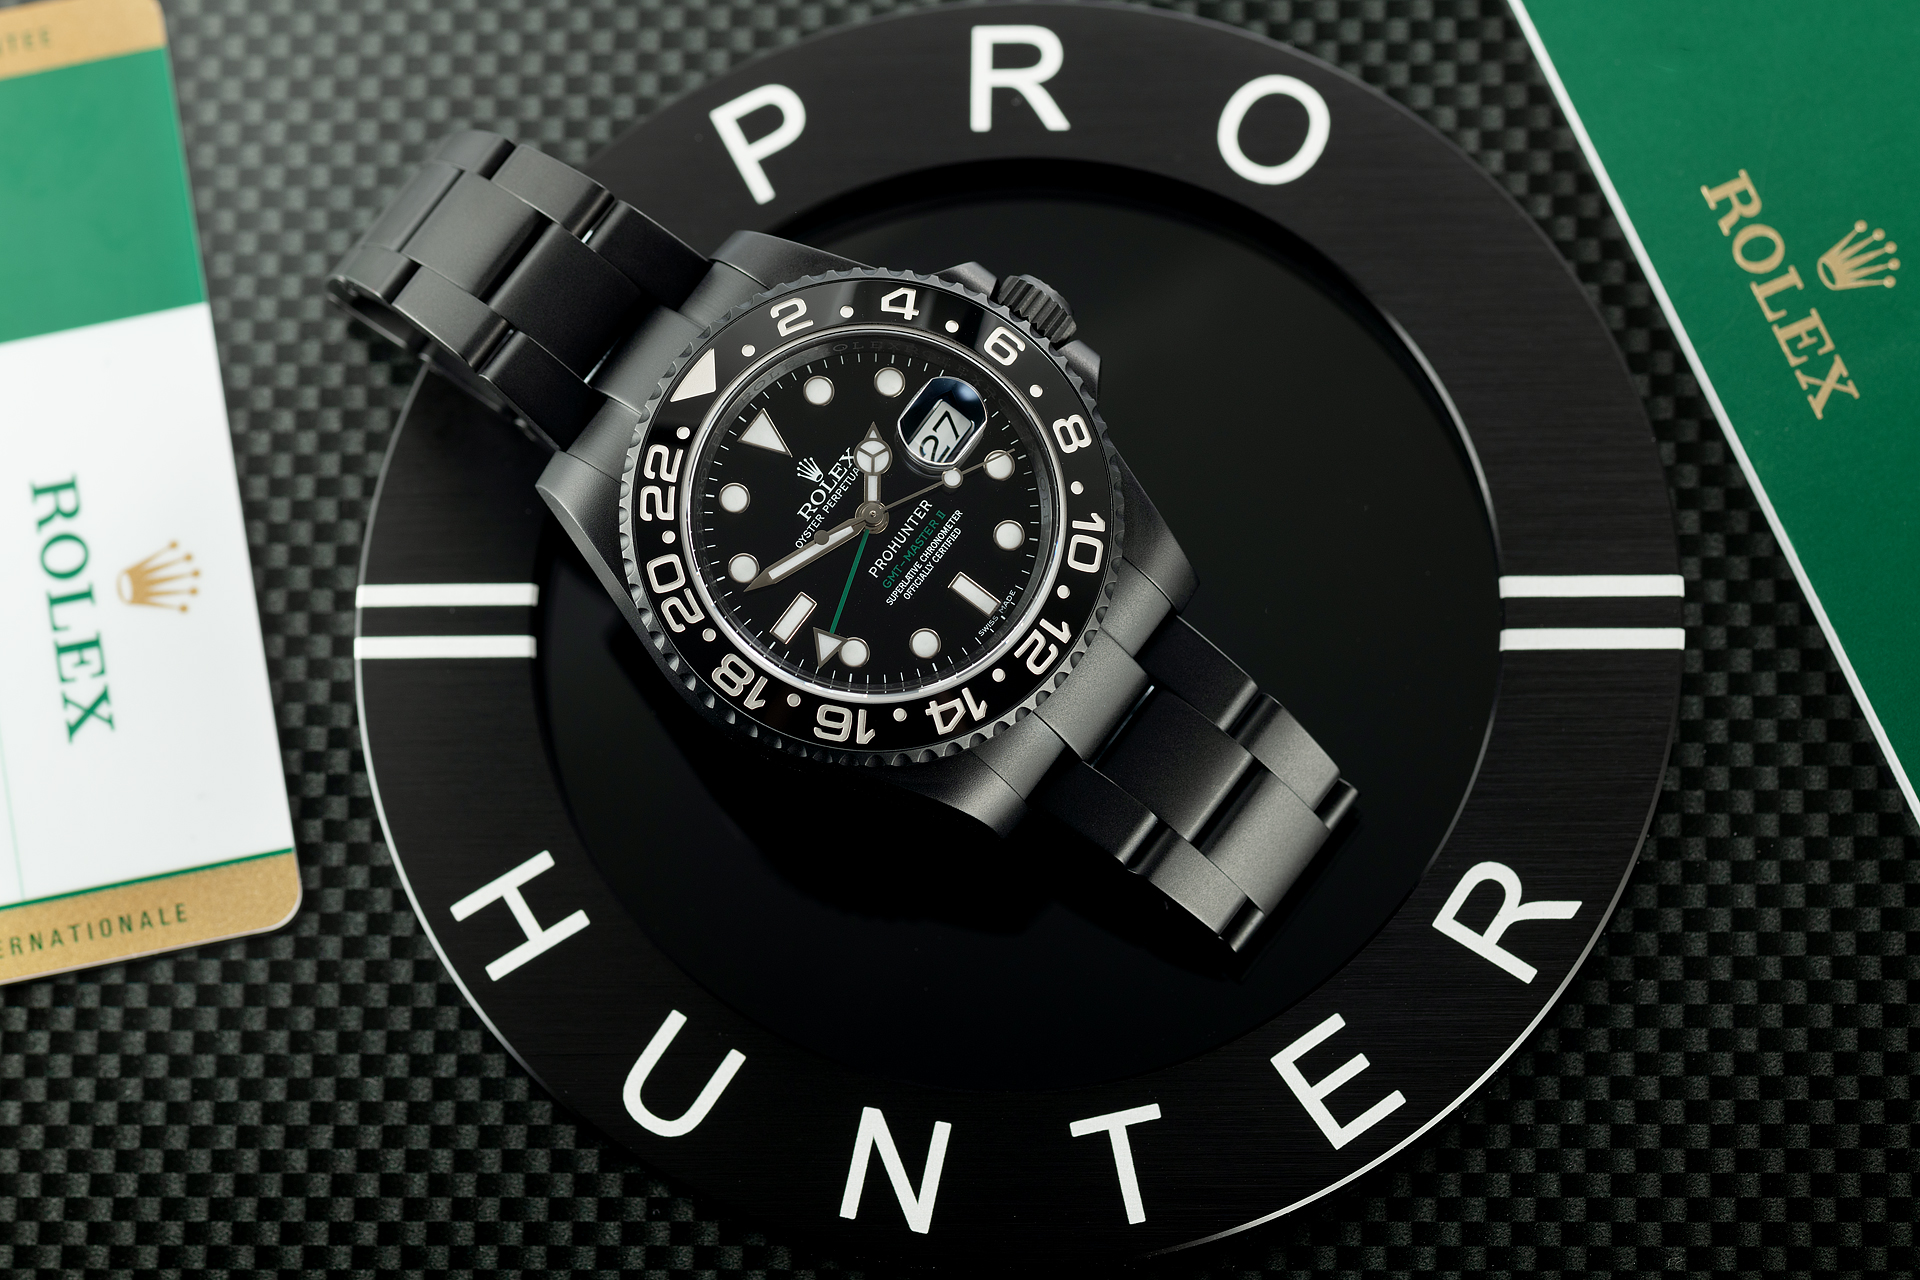 Pro Hunter GMT-Master II | ref 116710LN | Edition 'One of 100' | The Watch Club